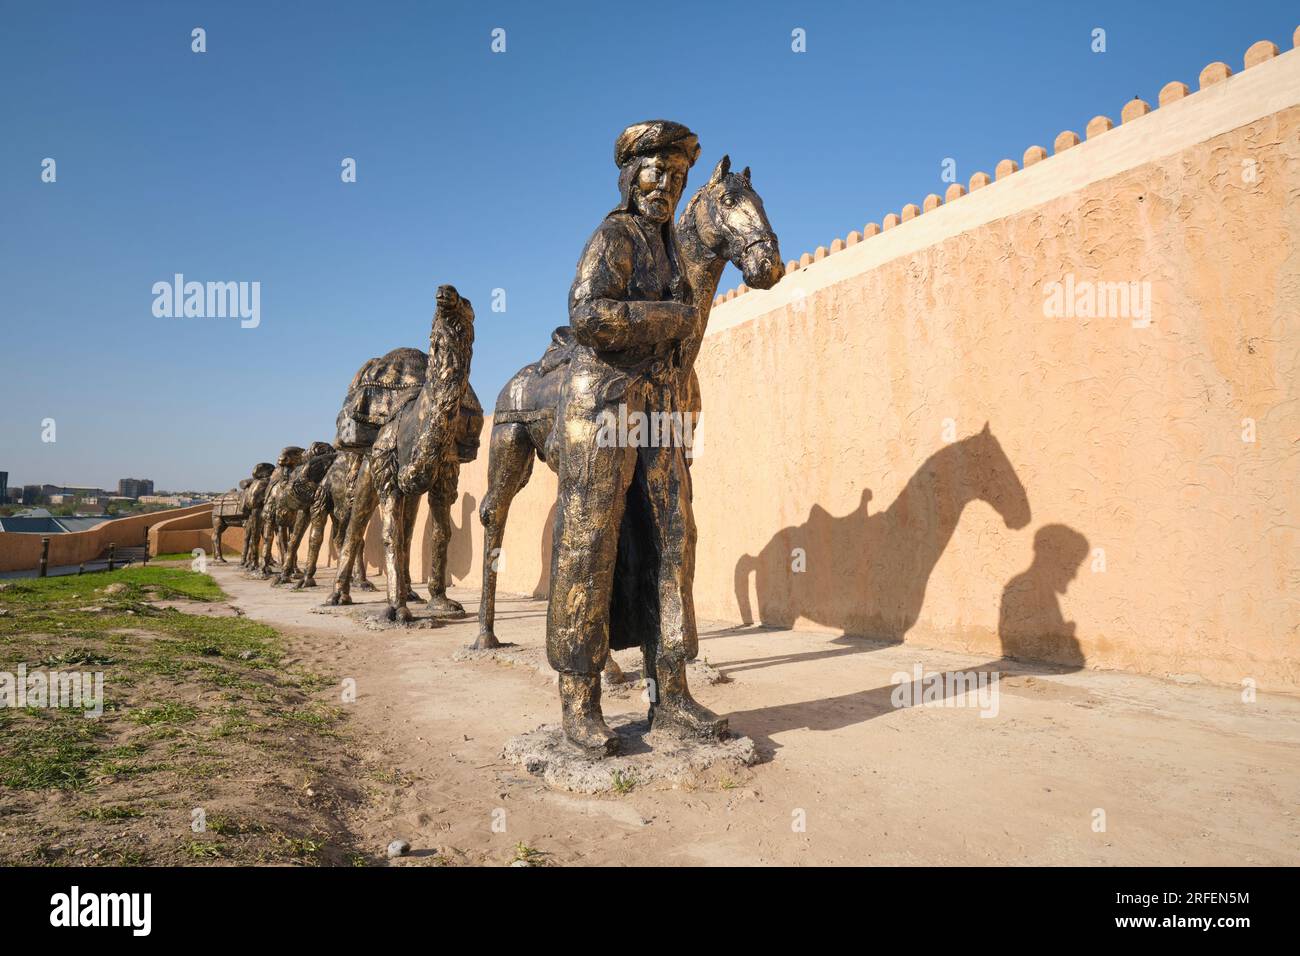 A large bronze sculpture depicting a typical Silk Road caravan scene with camels and horses carrying goods across the desert. At the old fortress, cit Stock Photo